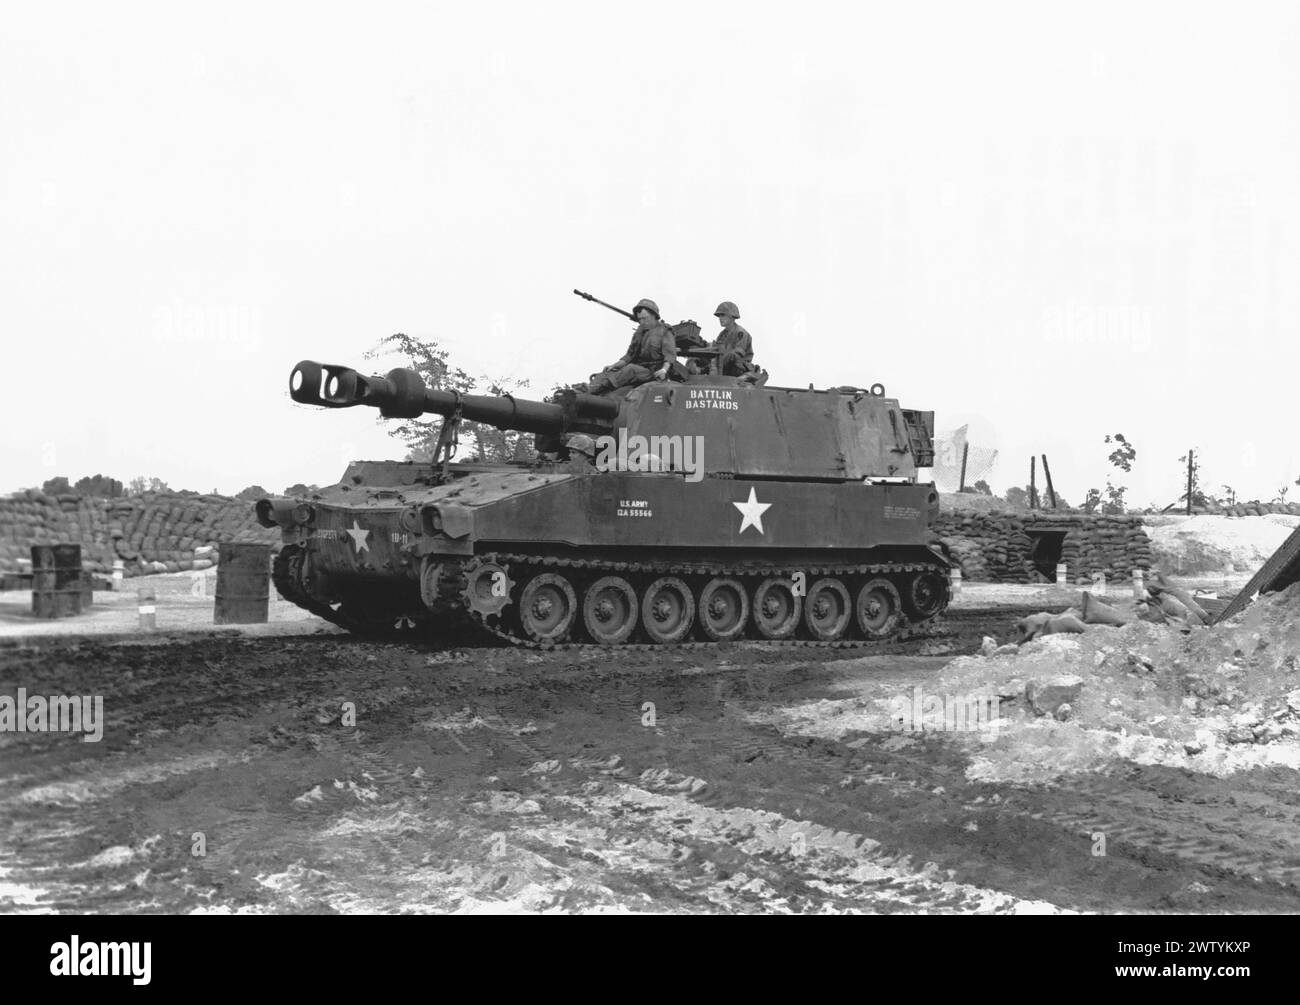 155mm Self propelled artillery piece from the 27th artillery, 25th infantry division, Fire Support Rawlings, 58 miles Northwest of Saigon in Vietnam Stock Photo